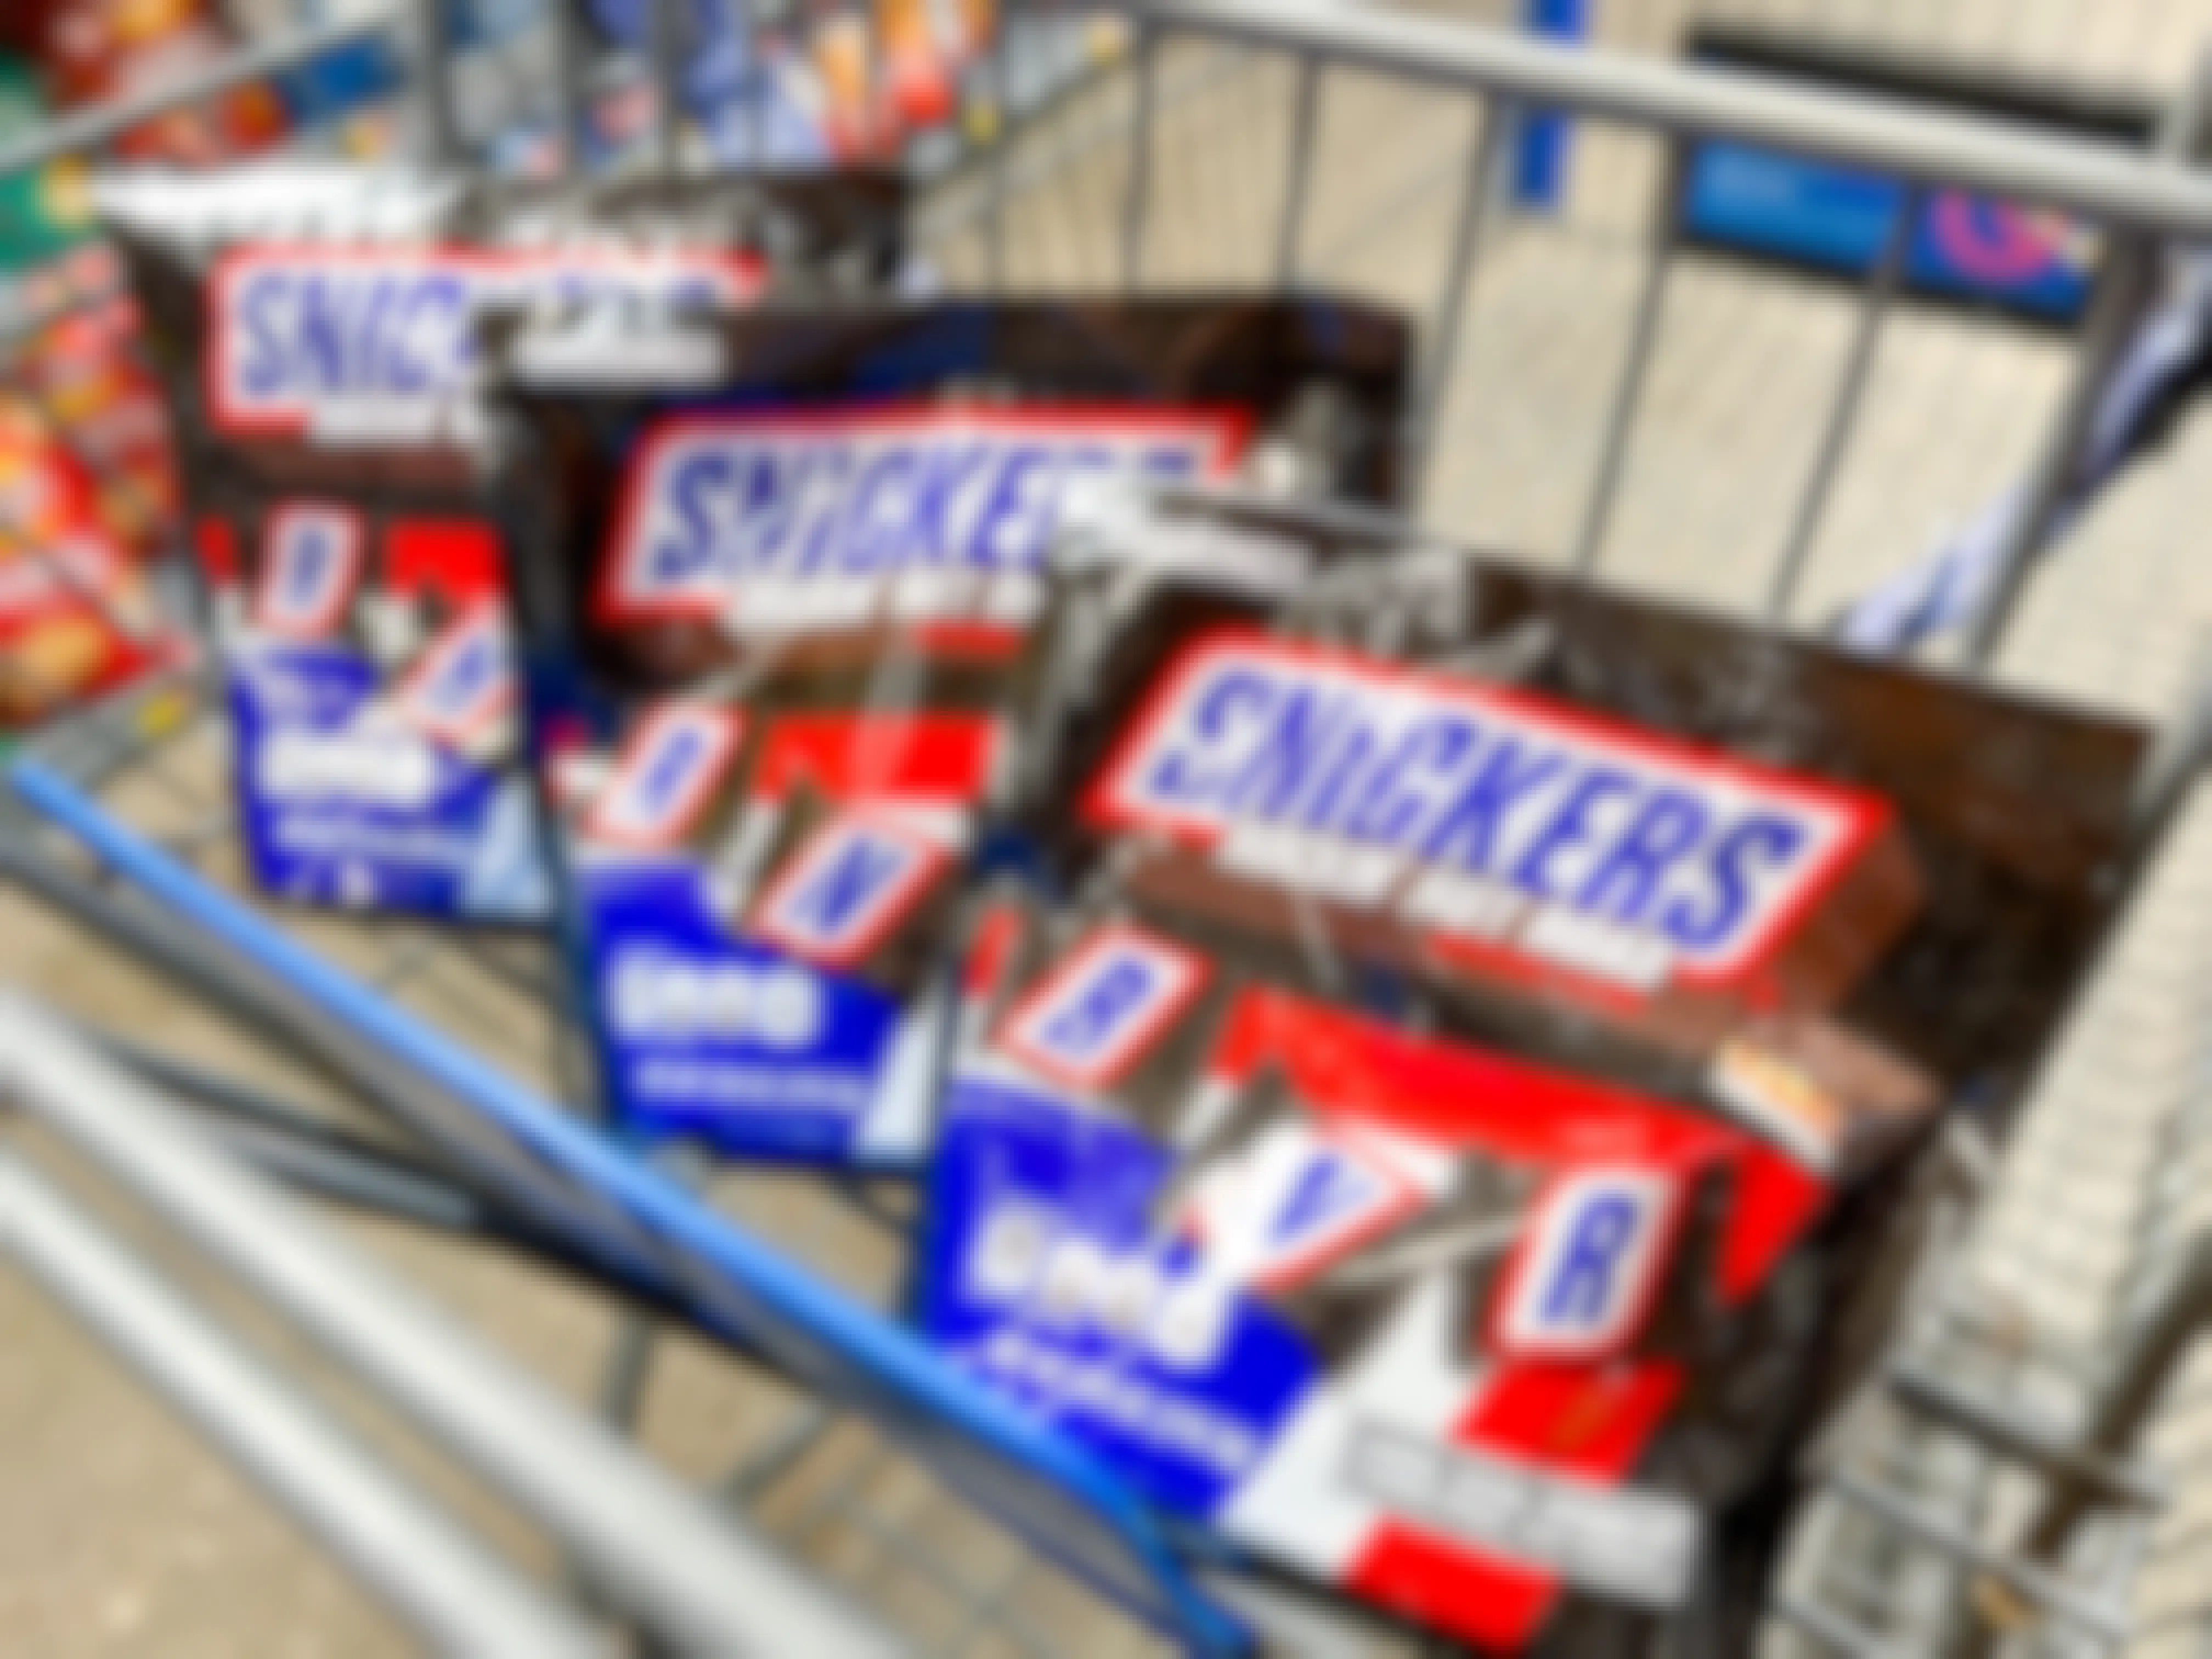 Free Share-Size Snickers Bag at Walmart